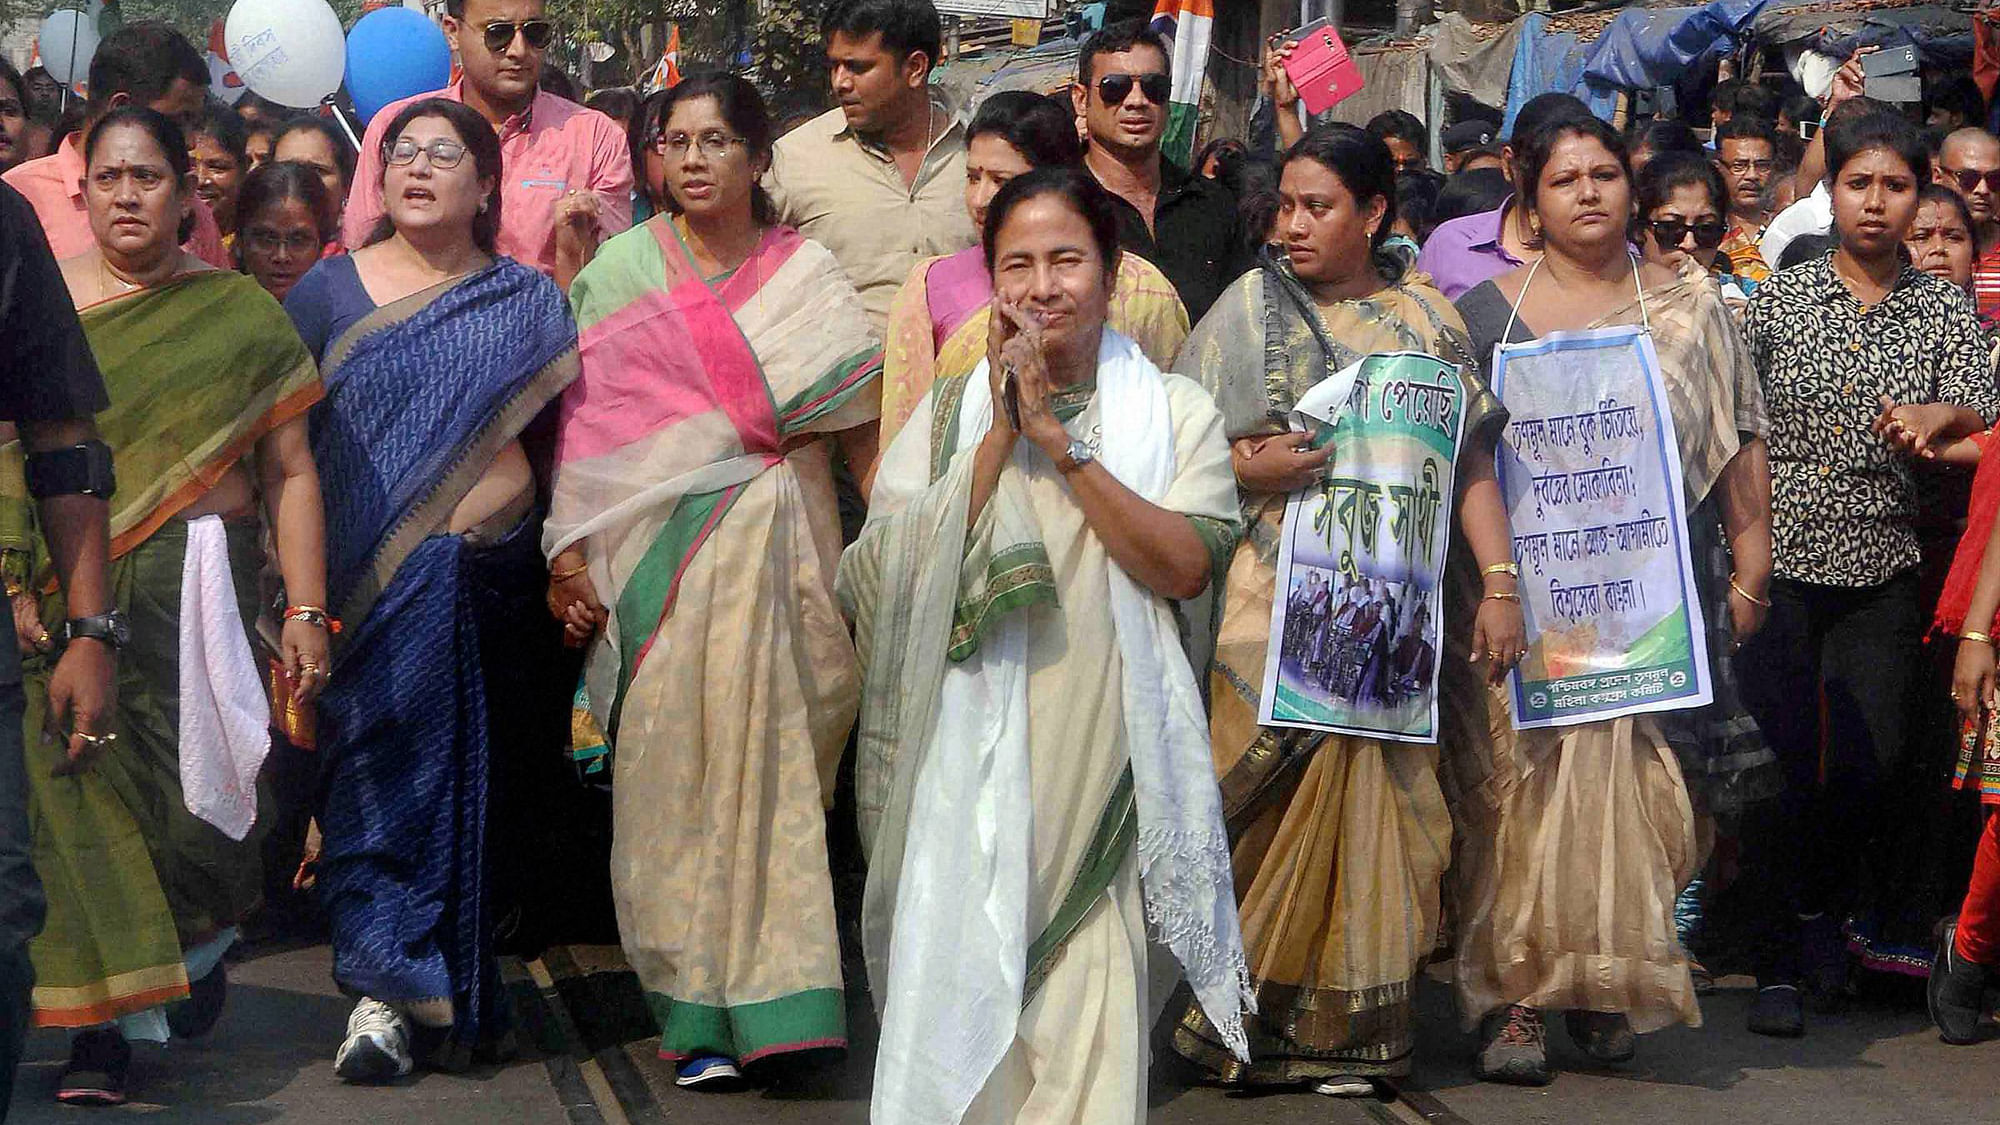 TMC chief and West Bengal Chief Minister Mamata Banerjee leads an election campaign rally in Kolkata. (Photo: PTI)